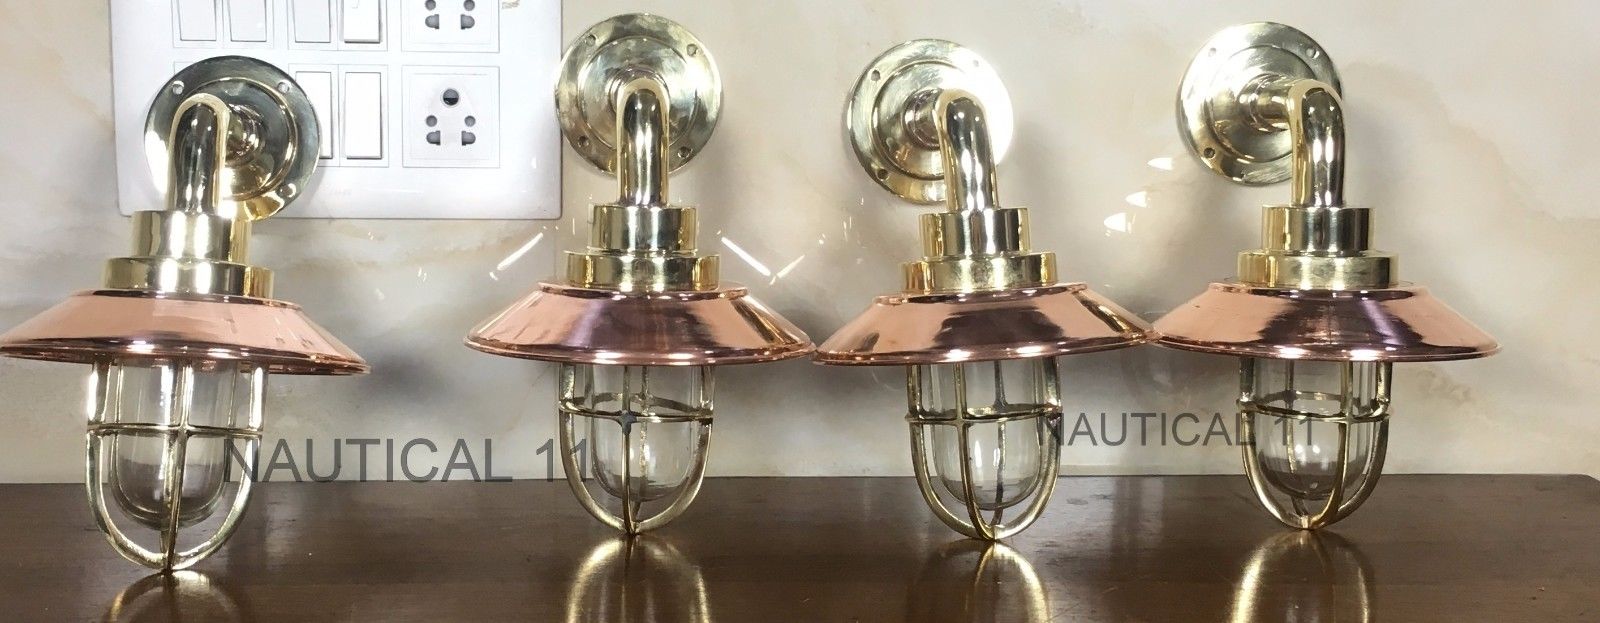 Fantastic Antique Style Nautical Brass Light Lot of 4